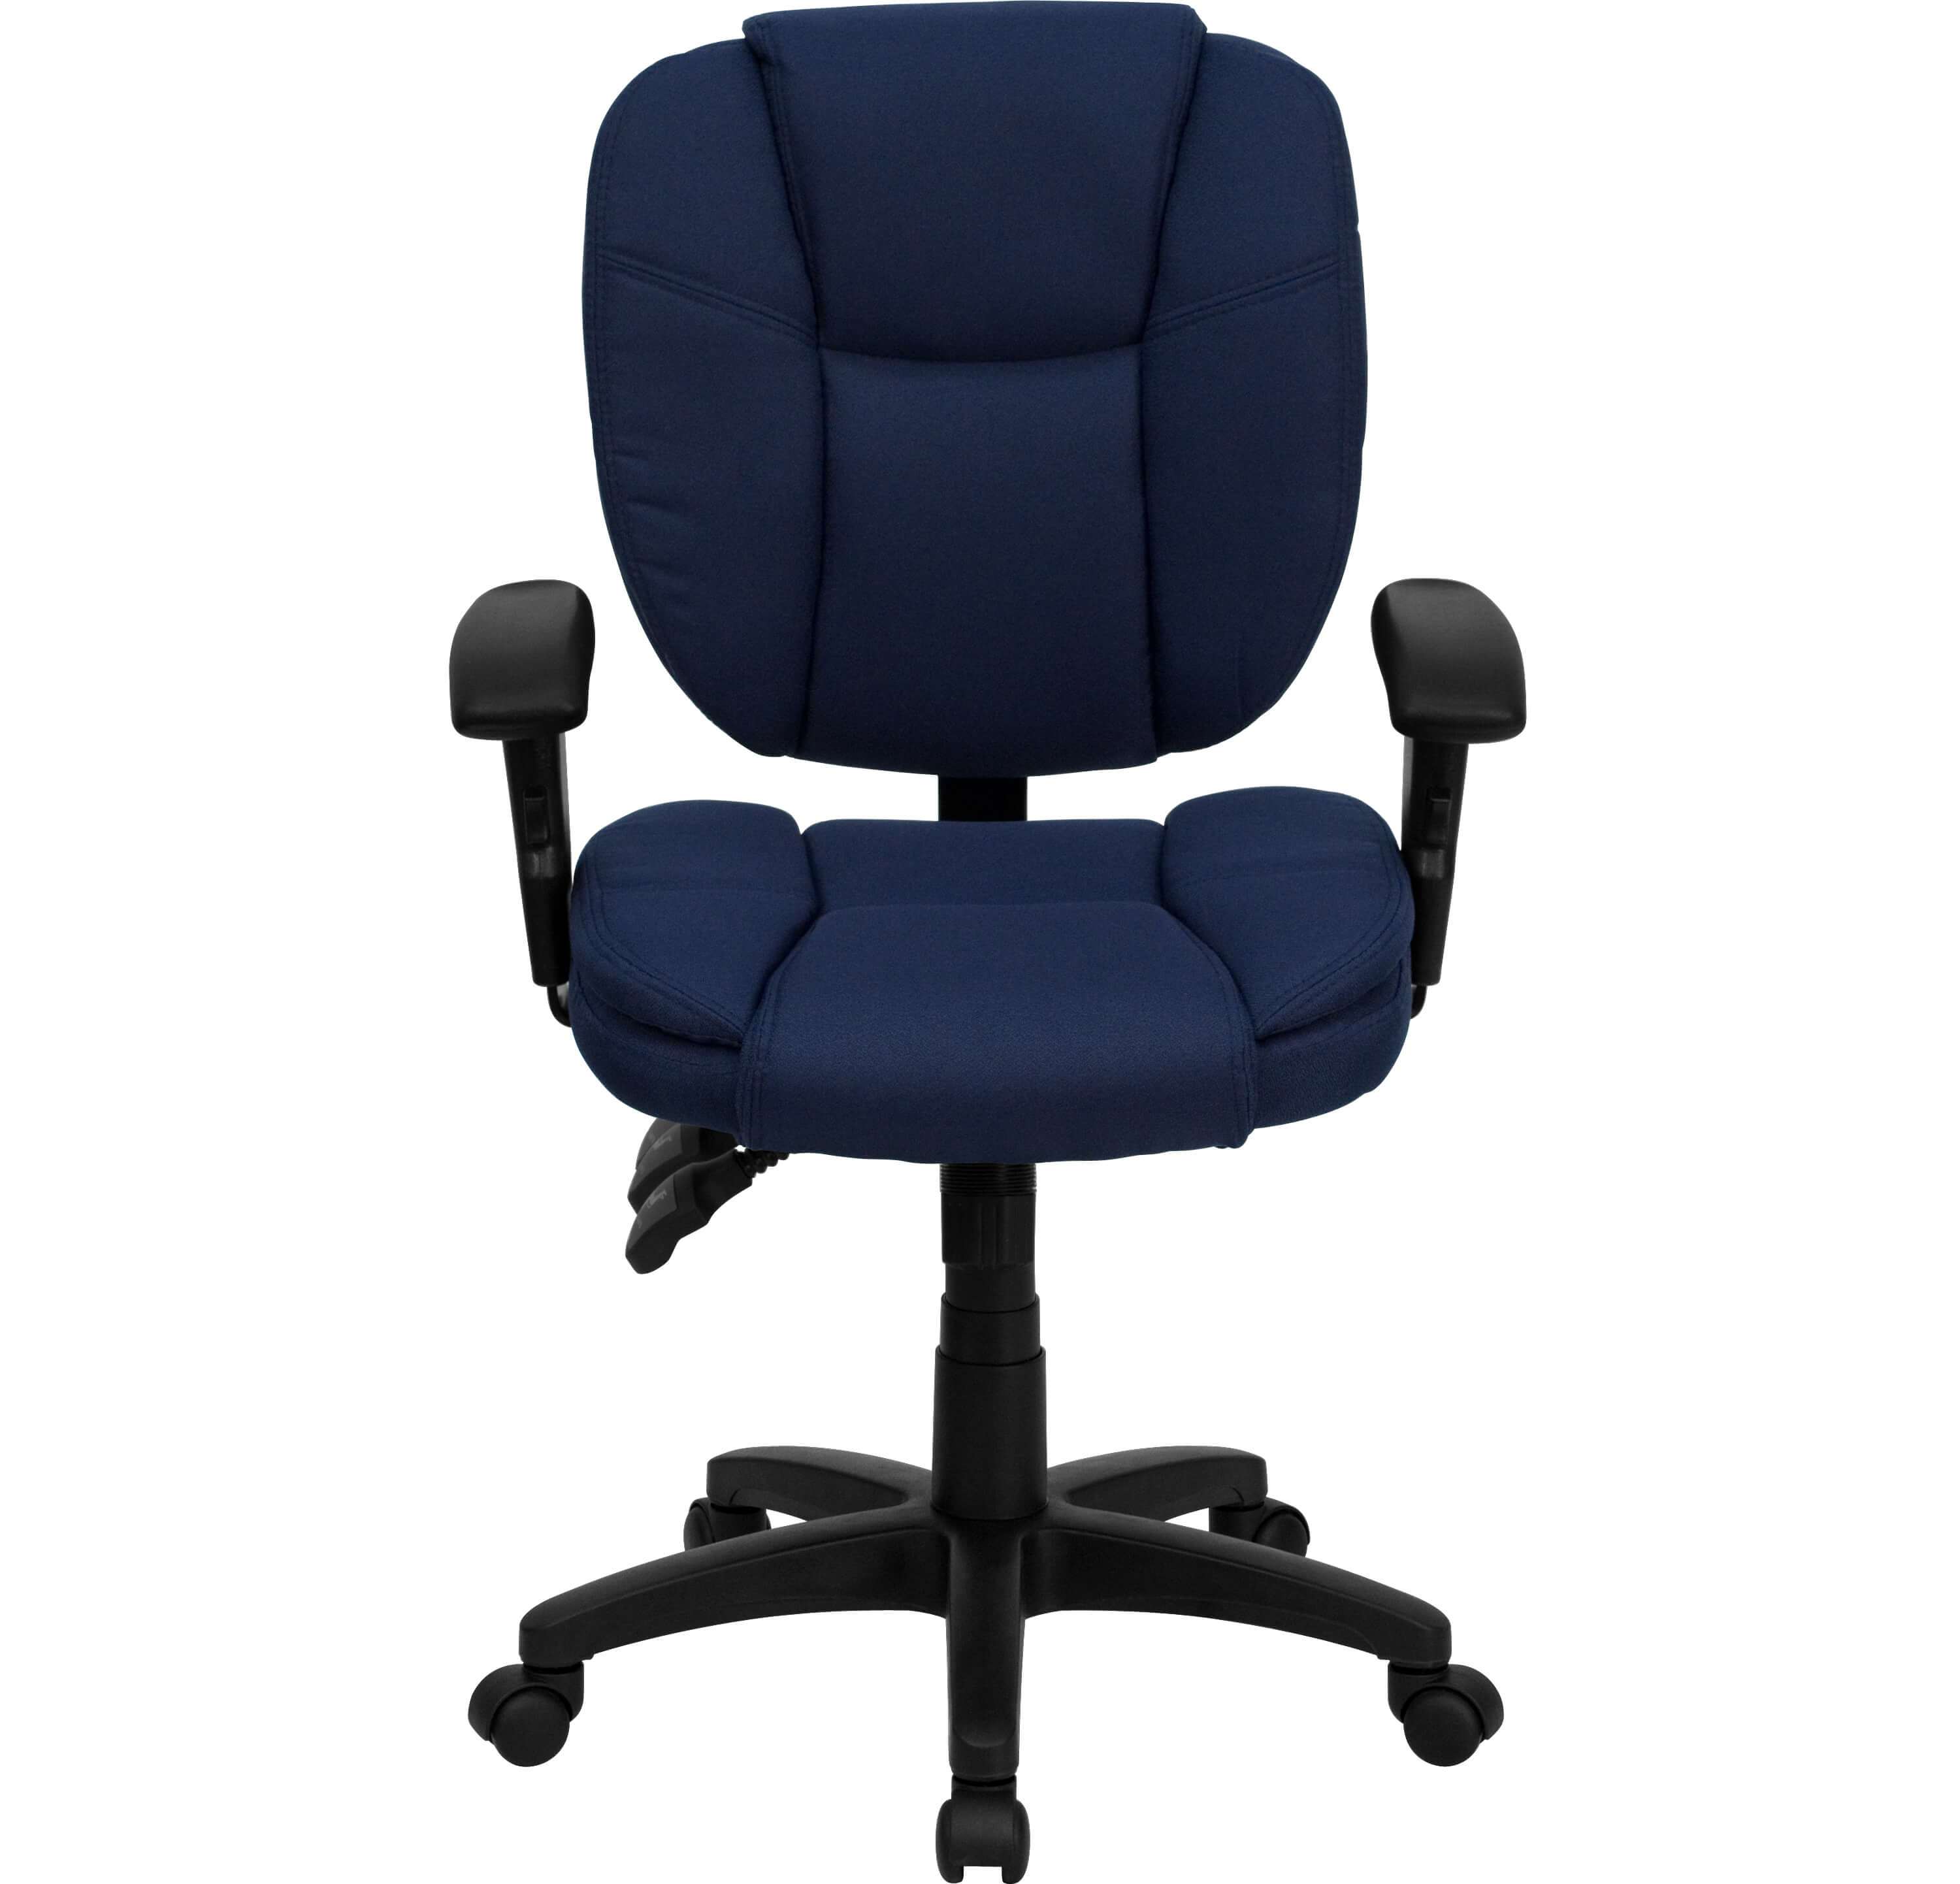 Cool desk chairs CUB GO 930F NVY ARMS GG FLA